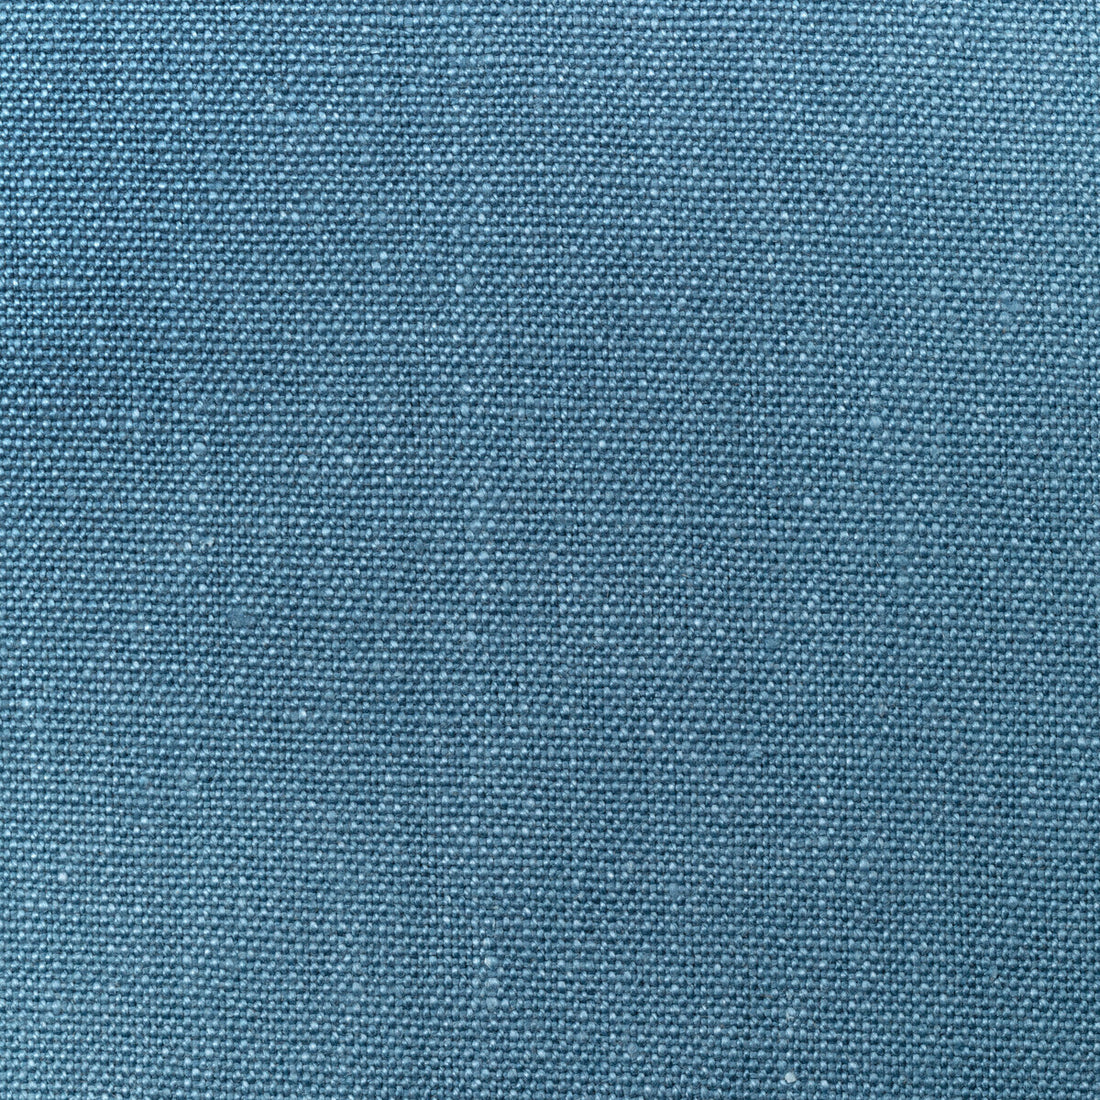 Knightbridge fabric in mid blue color - pattern PF50199.660.0 - by Baker Lifestyle in the Perfect Plains collection